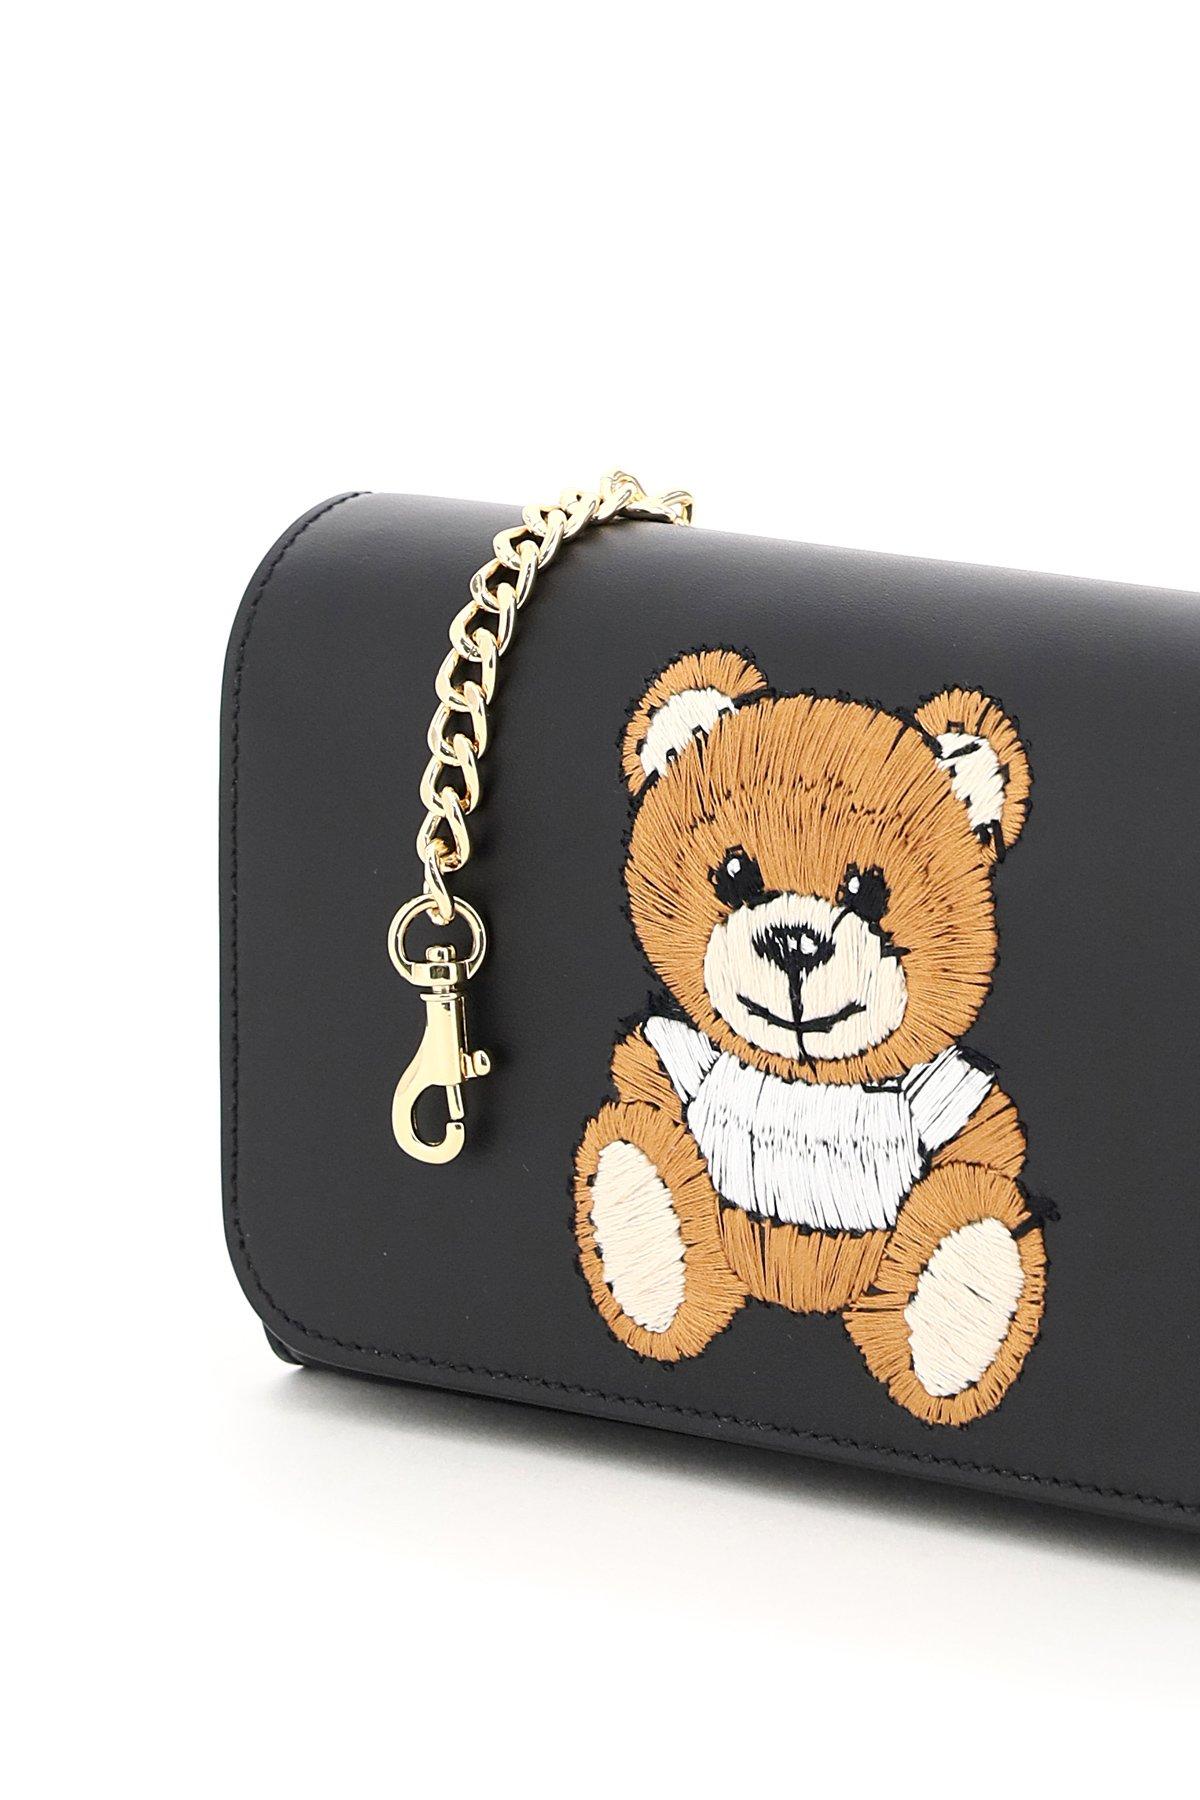 Moschino Mini Bag Chain Teddy Bear Embroidery Os Leather in Black | Lyst